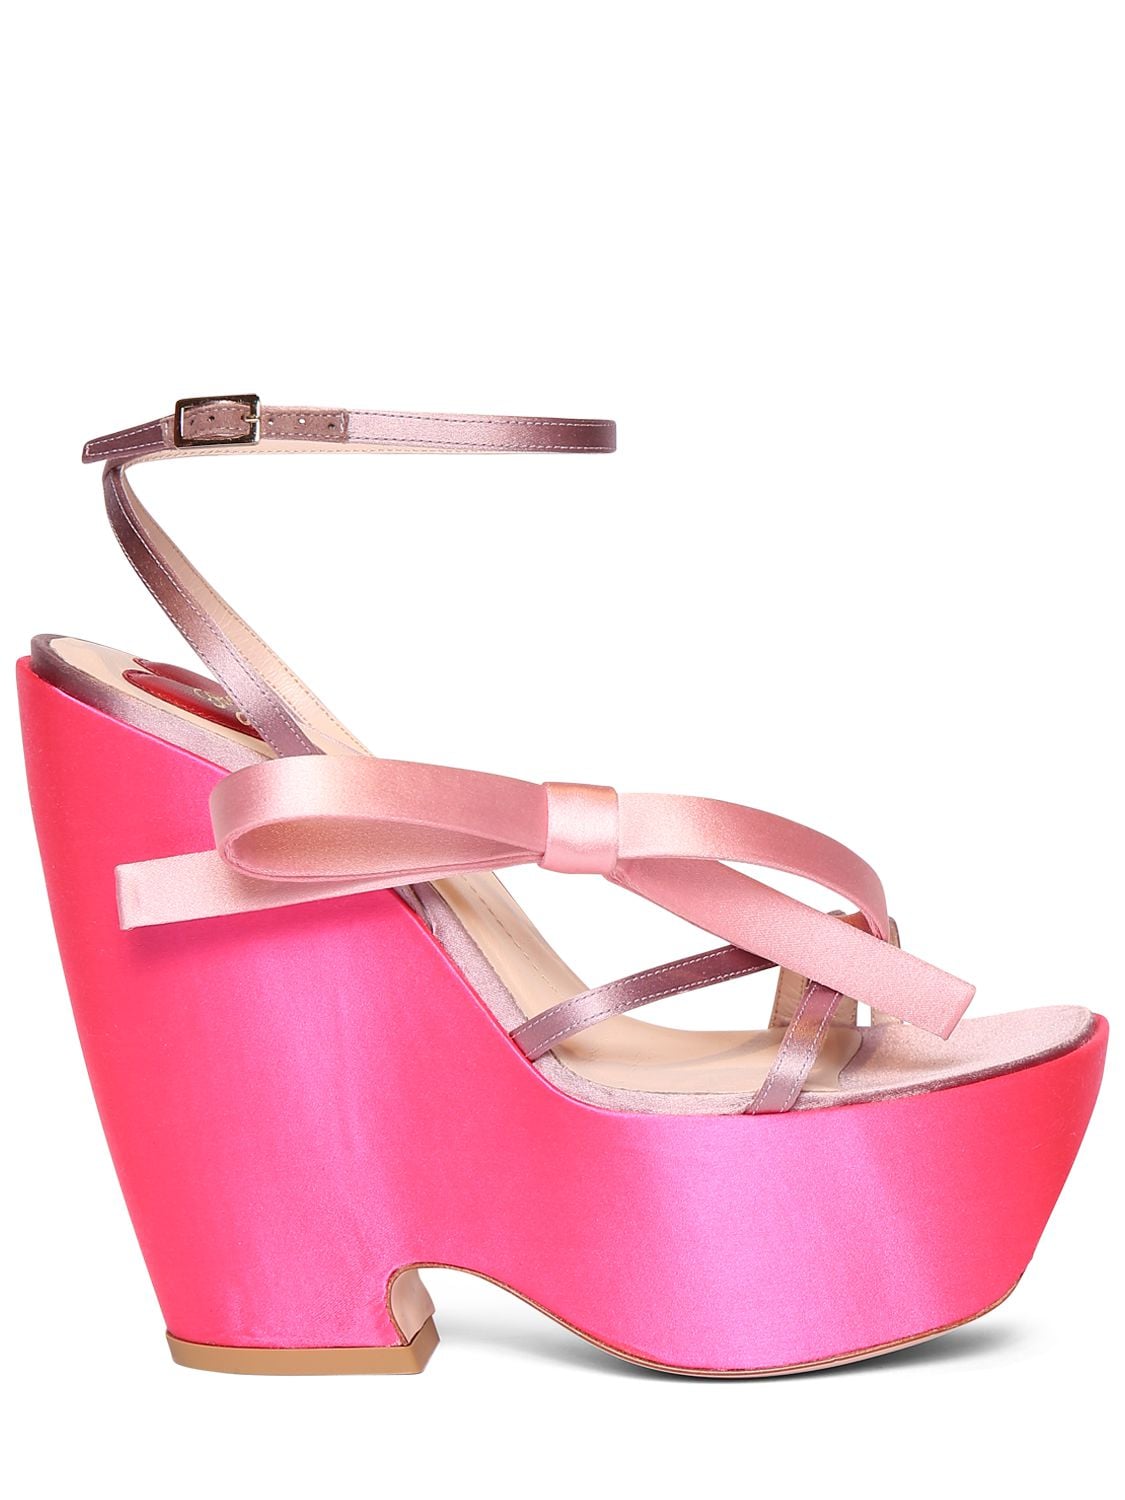 Roger Vivier 100mm Choc Bow Satin Wedges In Fuchsia,lilac